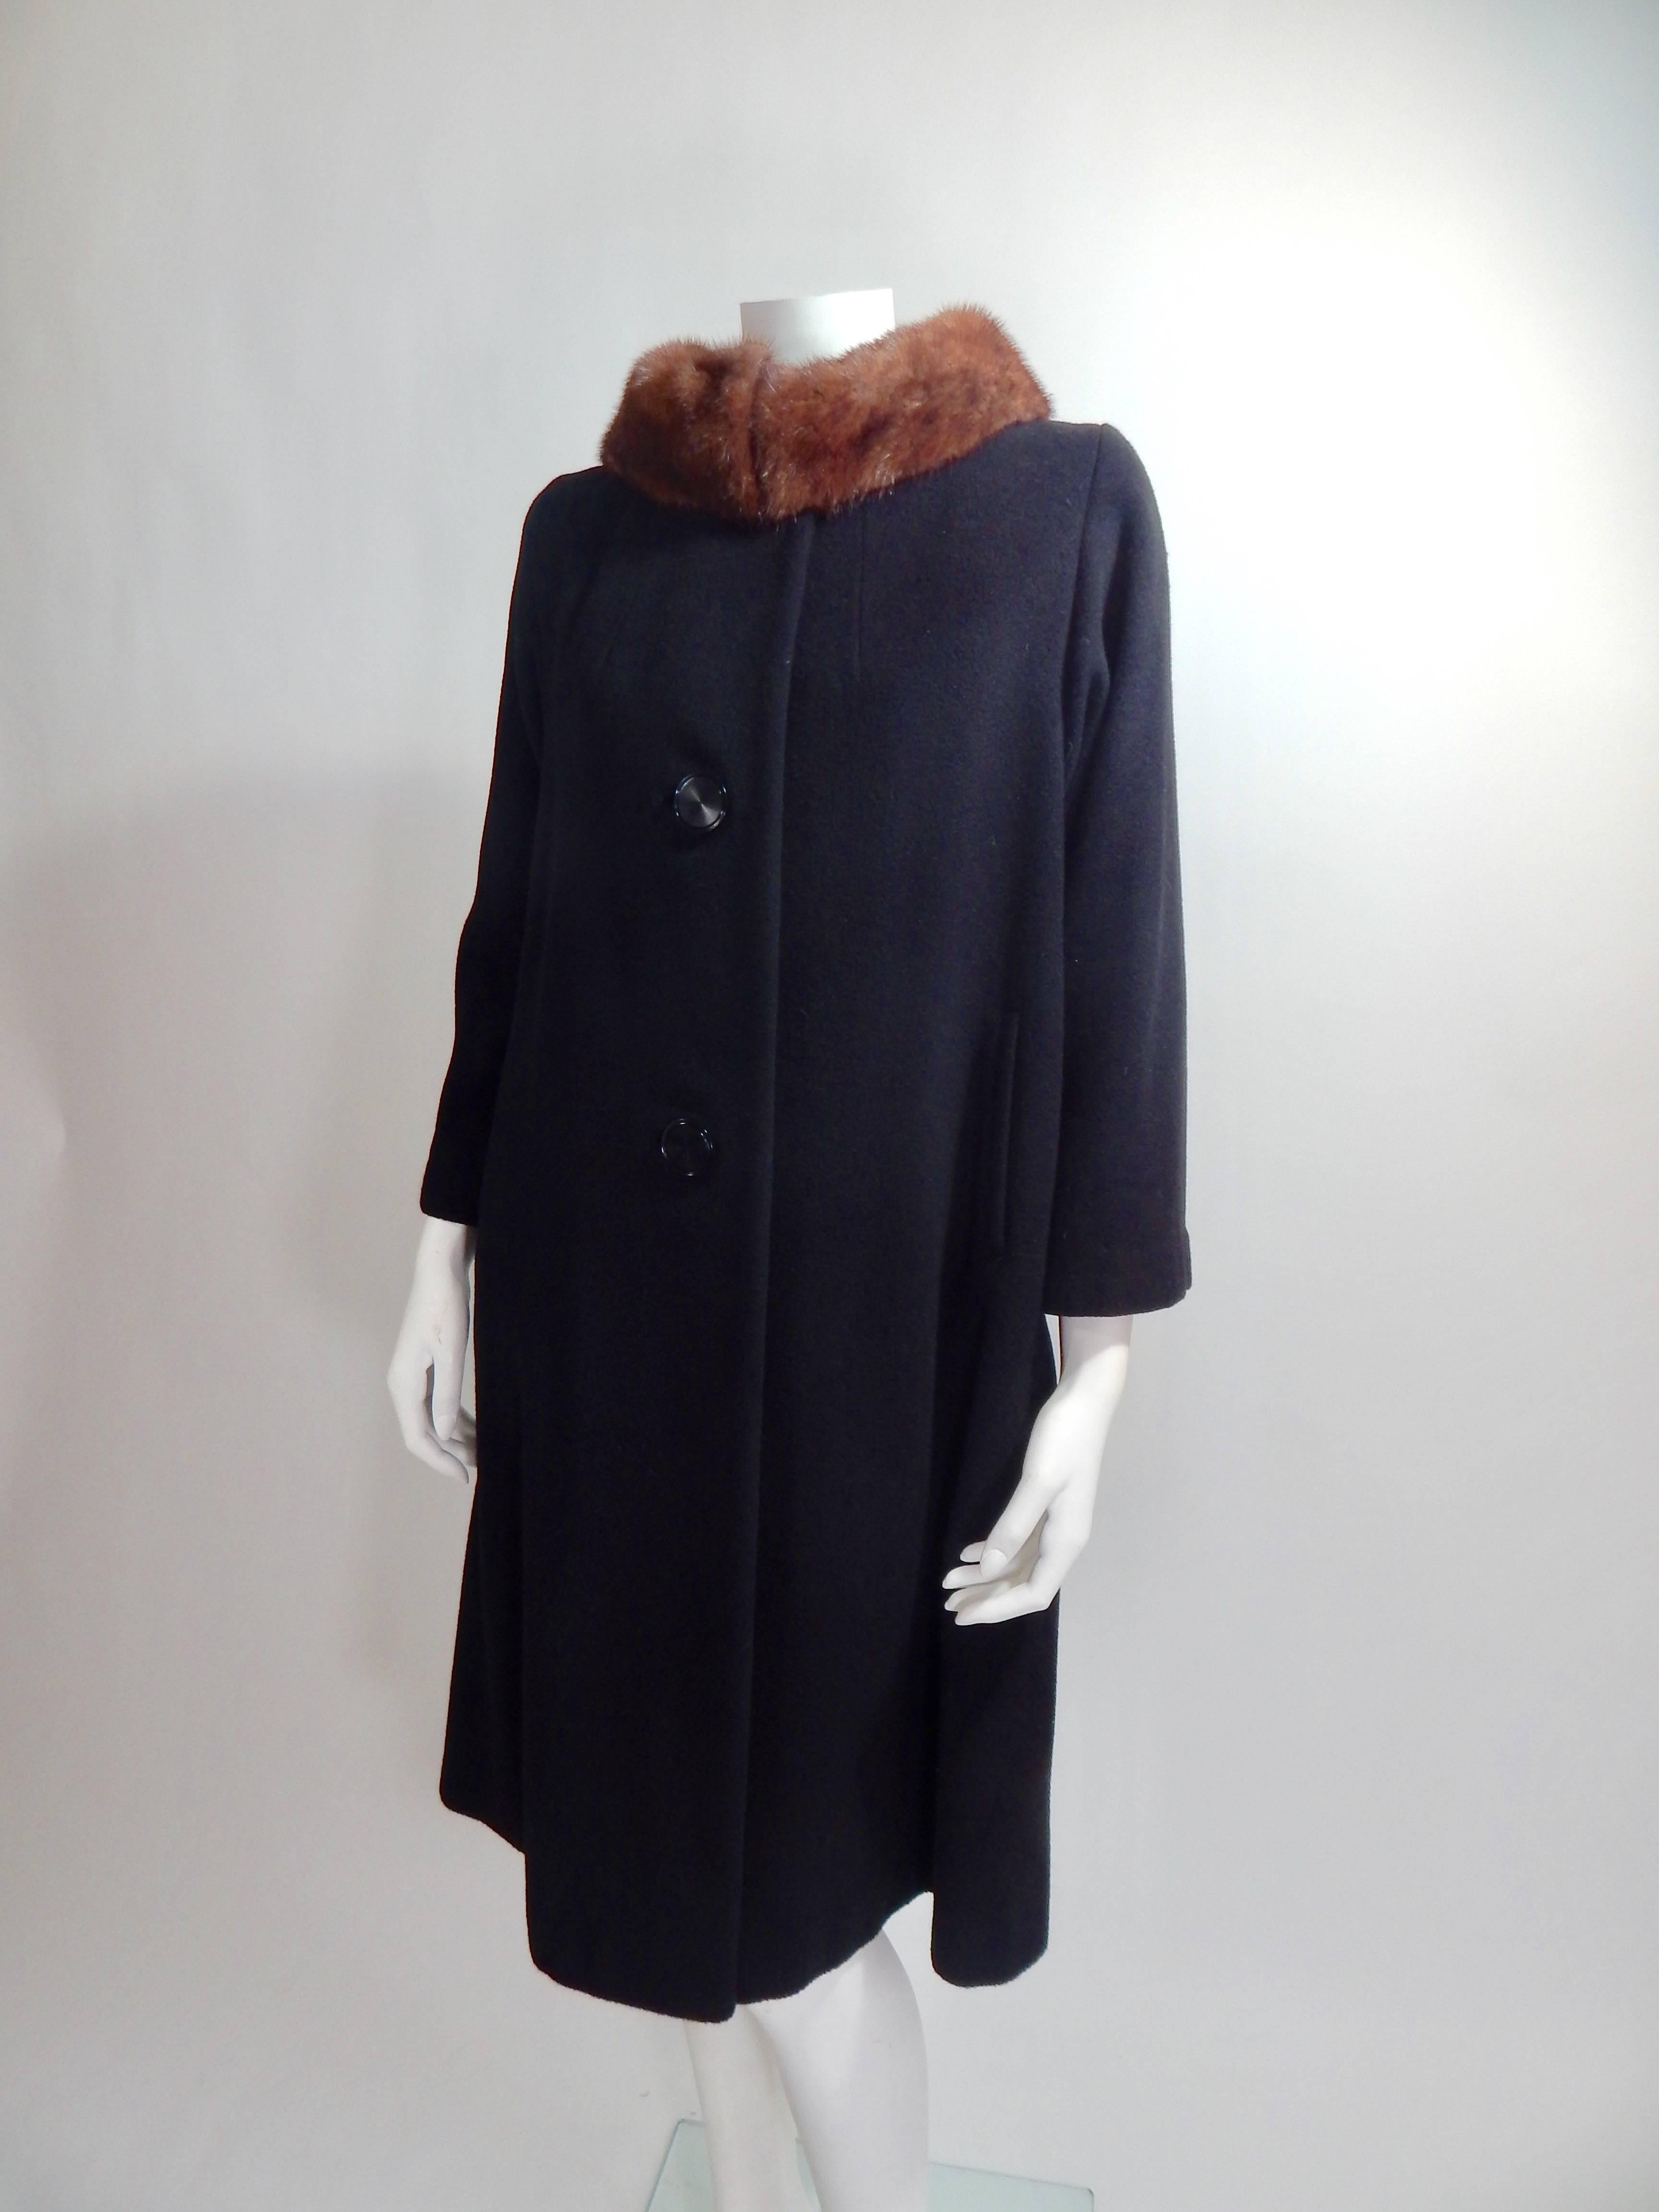 1950s 100% Cashmere Coat with Brown Mink Fur Collar. Large Black Buttons in front. Fully lined in black Silk. Interior and Exterior are both in Excellent Condition.
Approximate size 8.